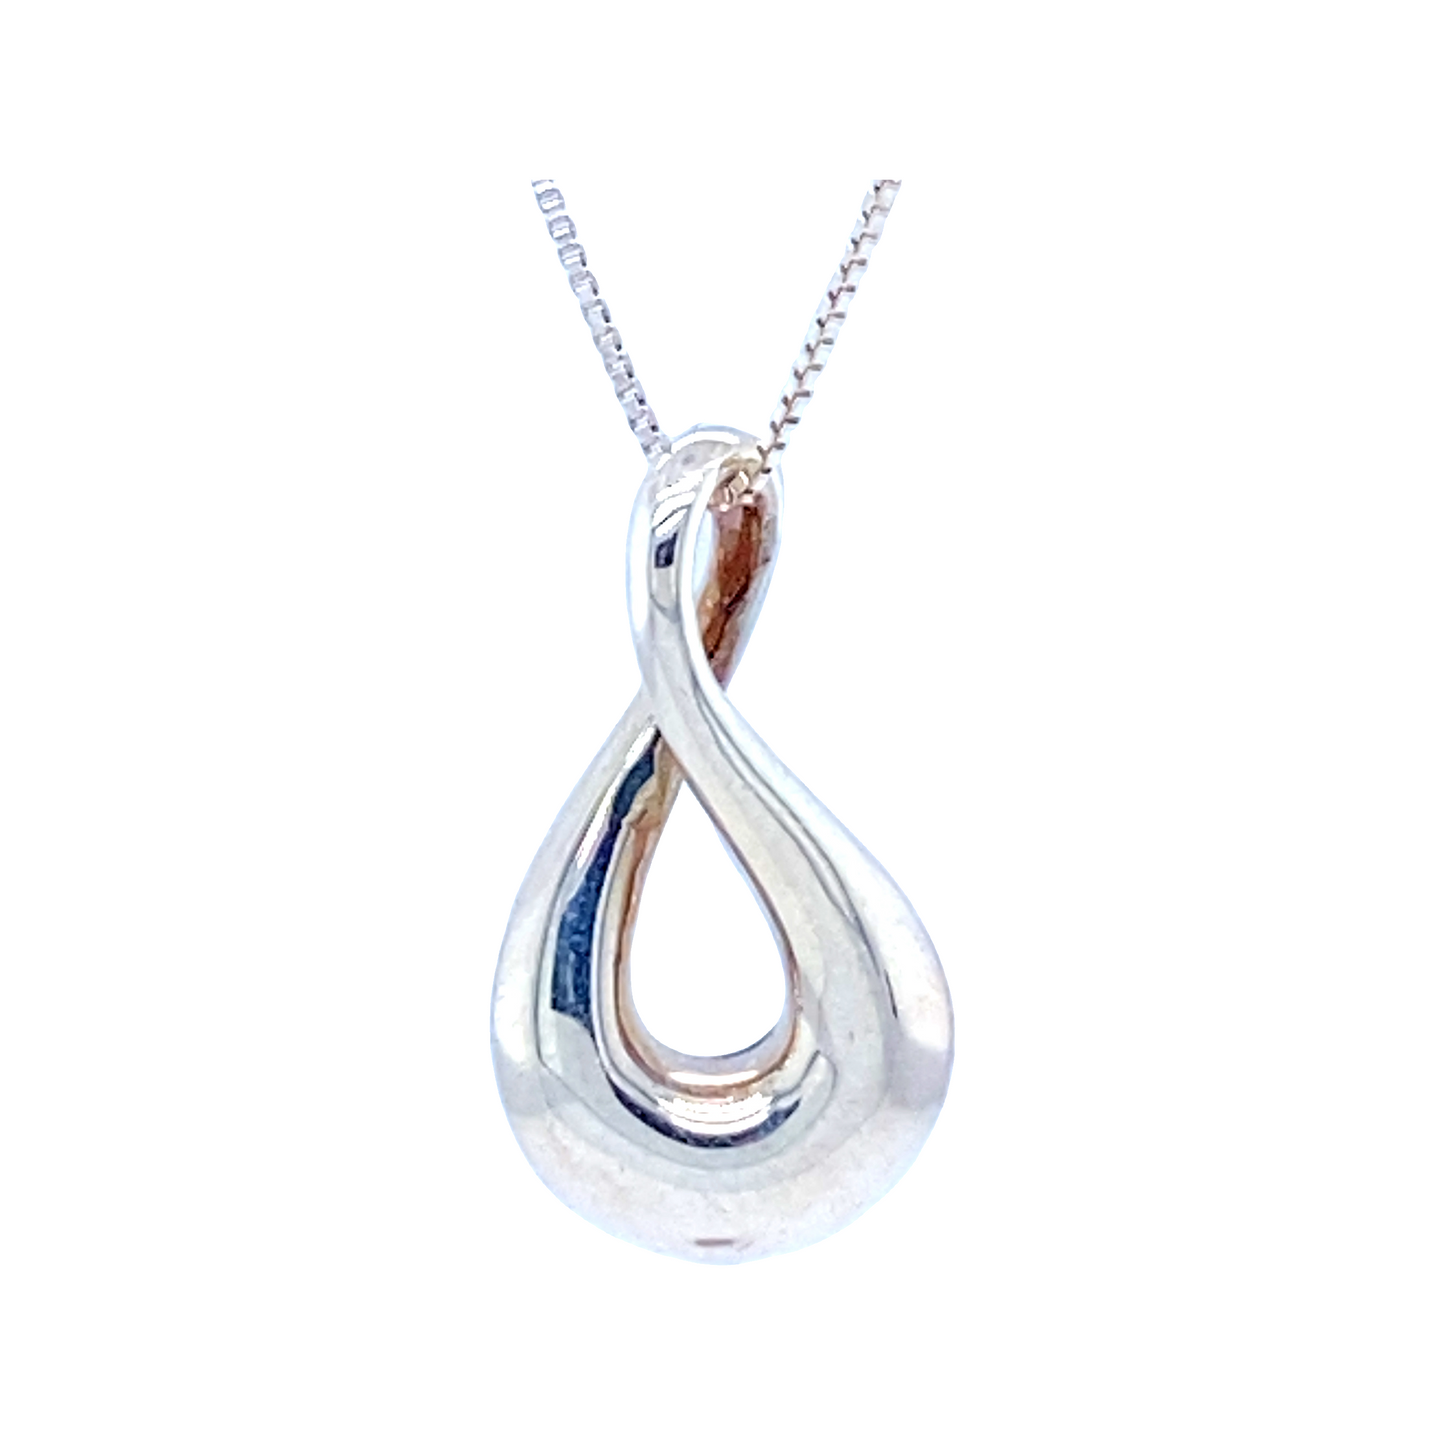 An elegant Super Silver necklace with a Classic Loop Pendant featuring smooth and fluid lines.